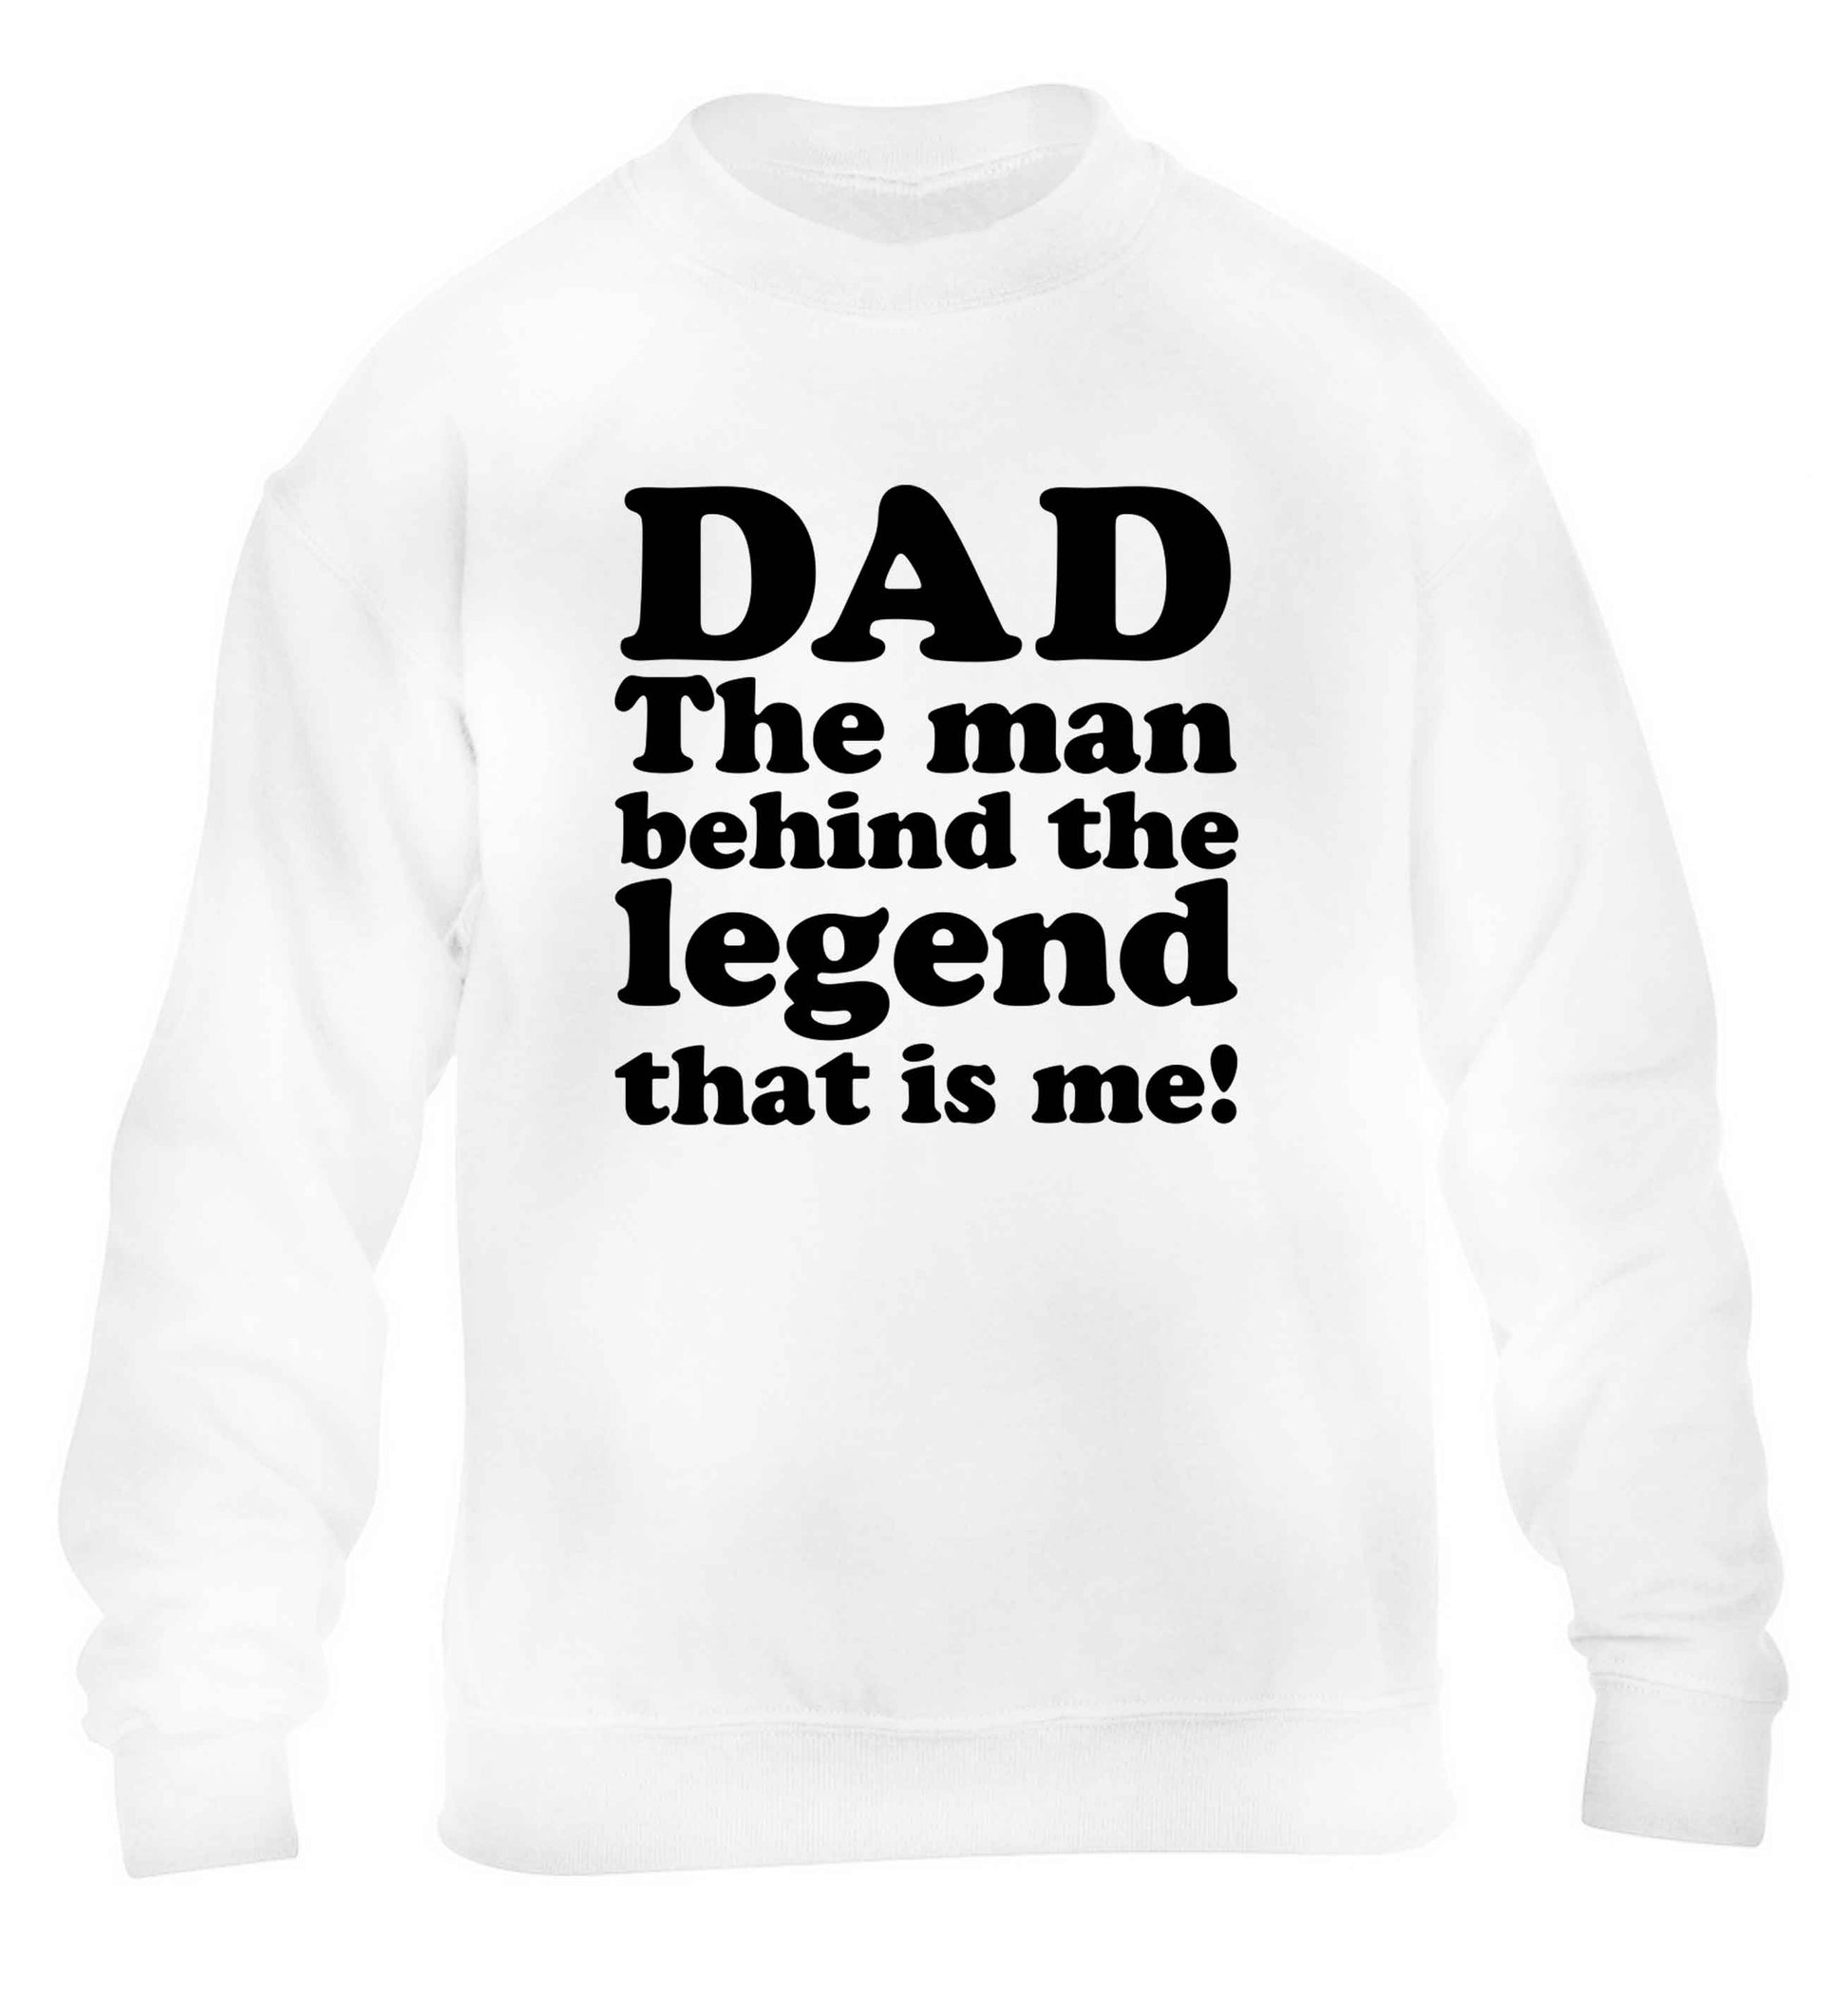 Dad the man behind the legend that is me children's white sweater 12-13 Years